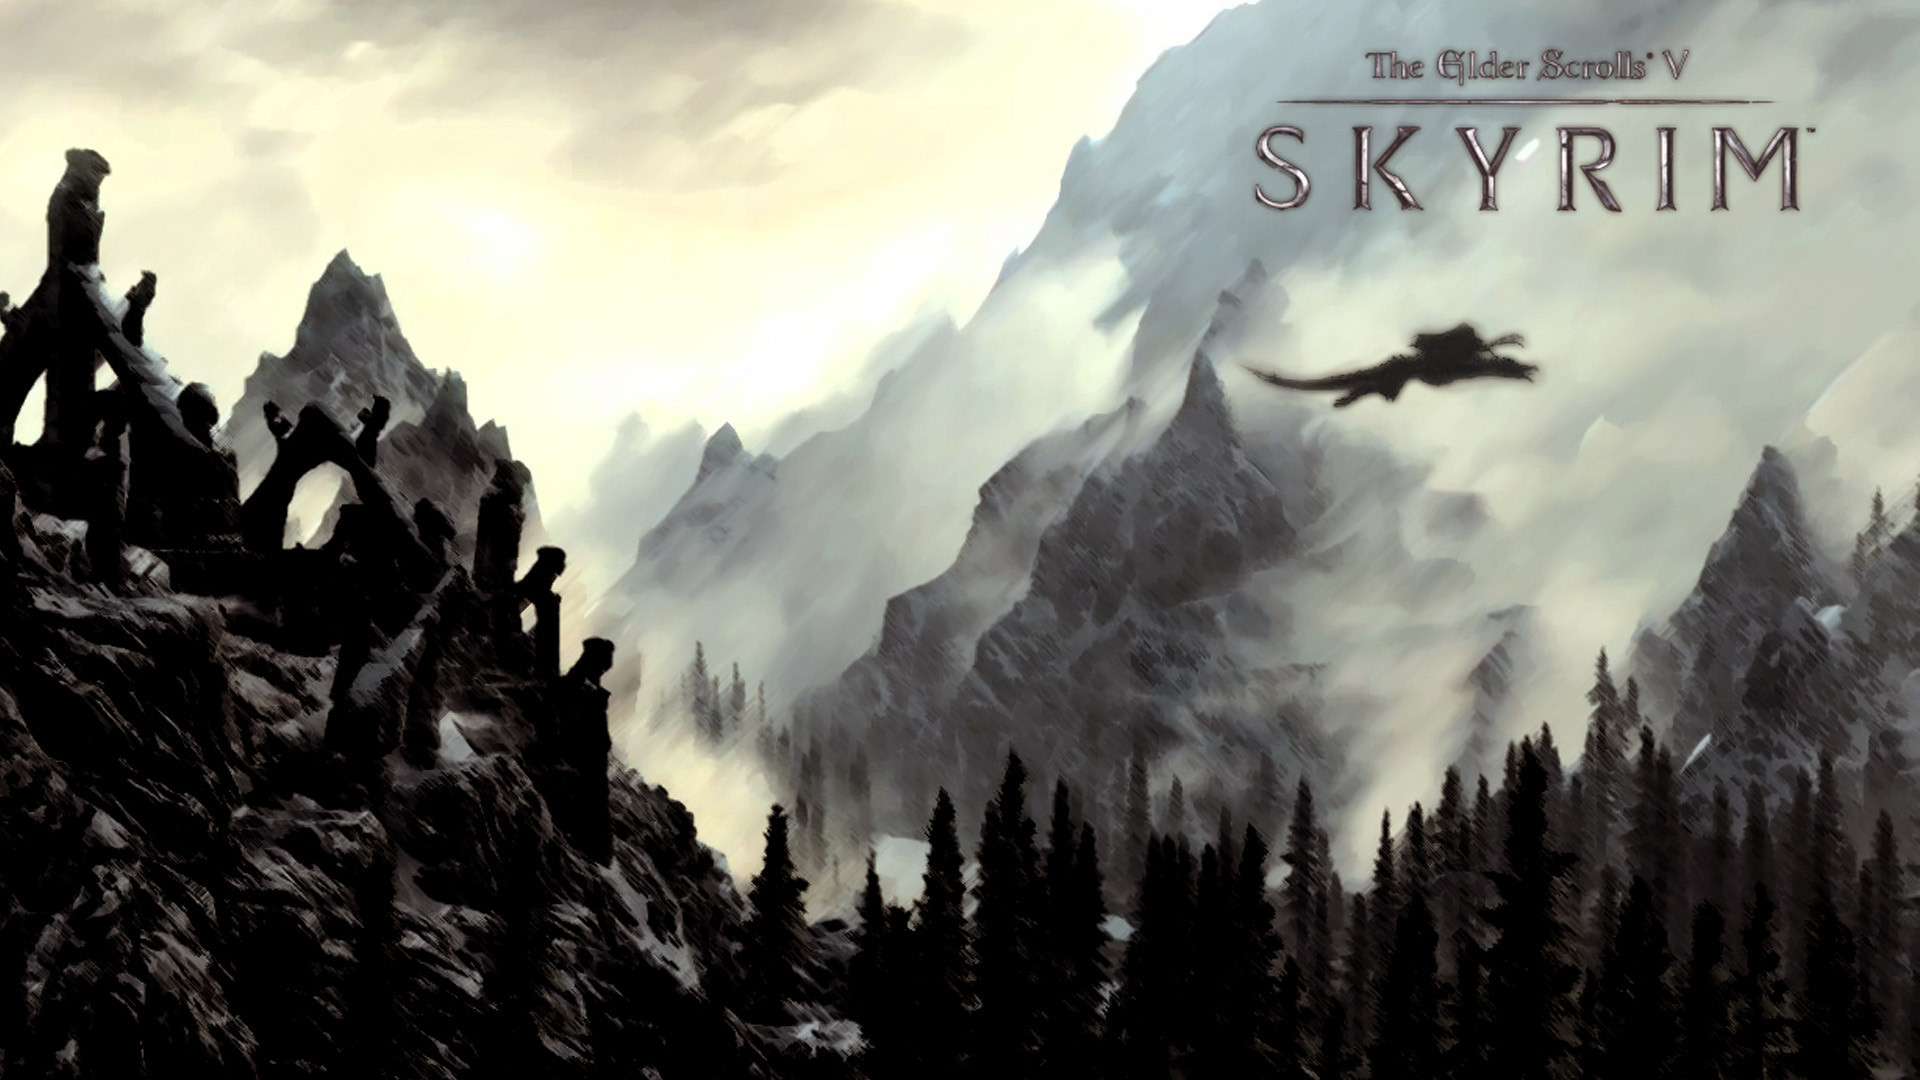 Skyrim Background free download | Wallpapers, Backgrounds, Images ...